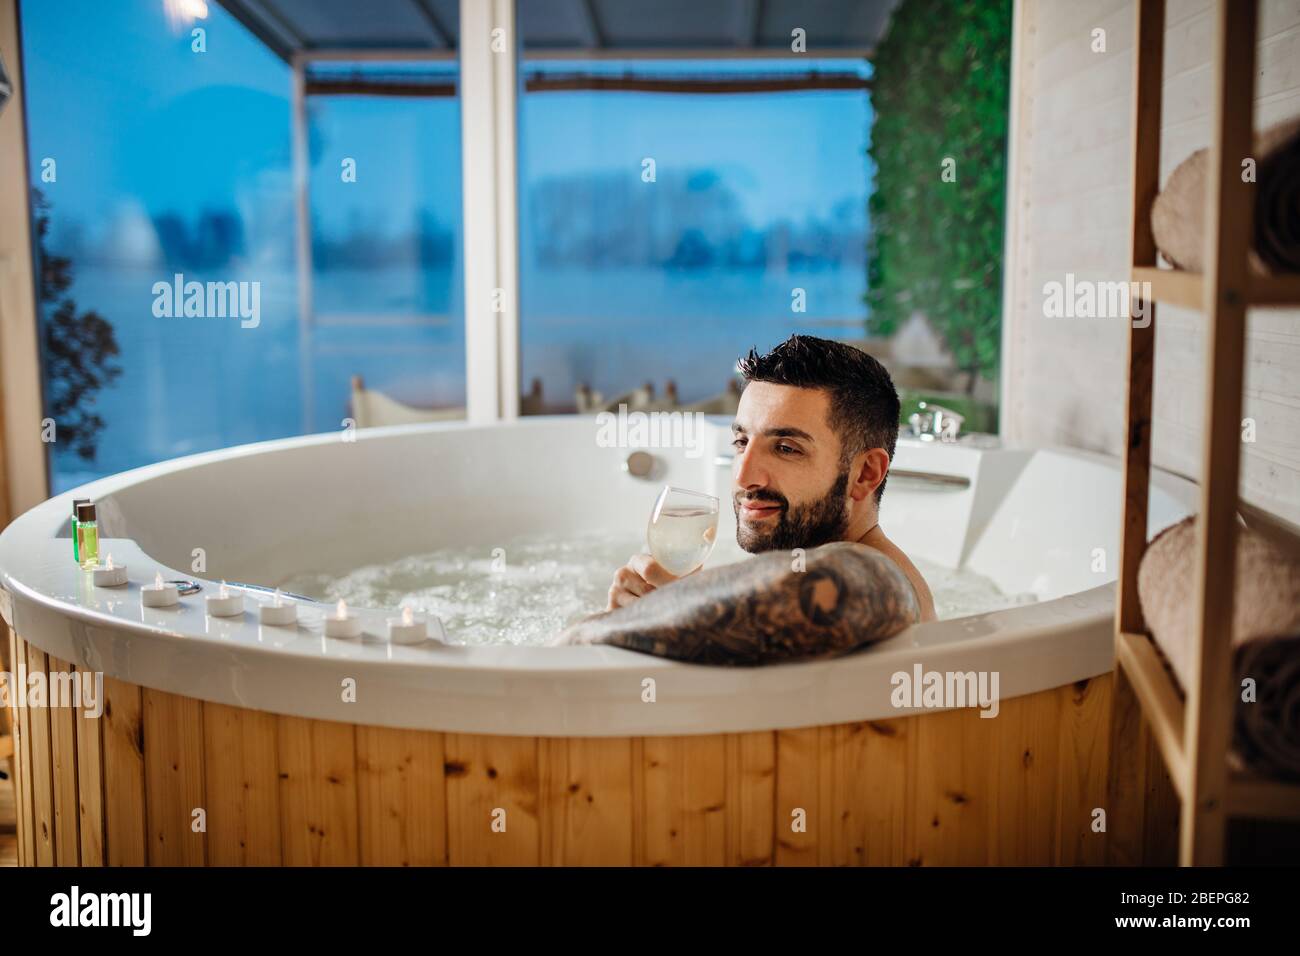 Man relaxing at home in the hot tub bath ritual with a glass of wine.Spa day moment in bathroom indoors jacuzzi tub.Leisure activity.Good personal hyg Stock Photo